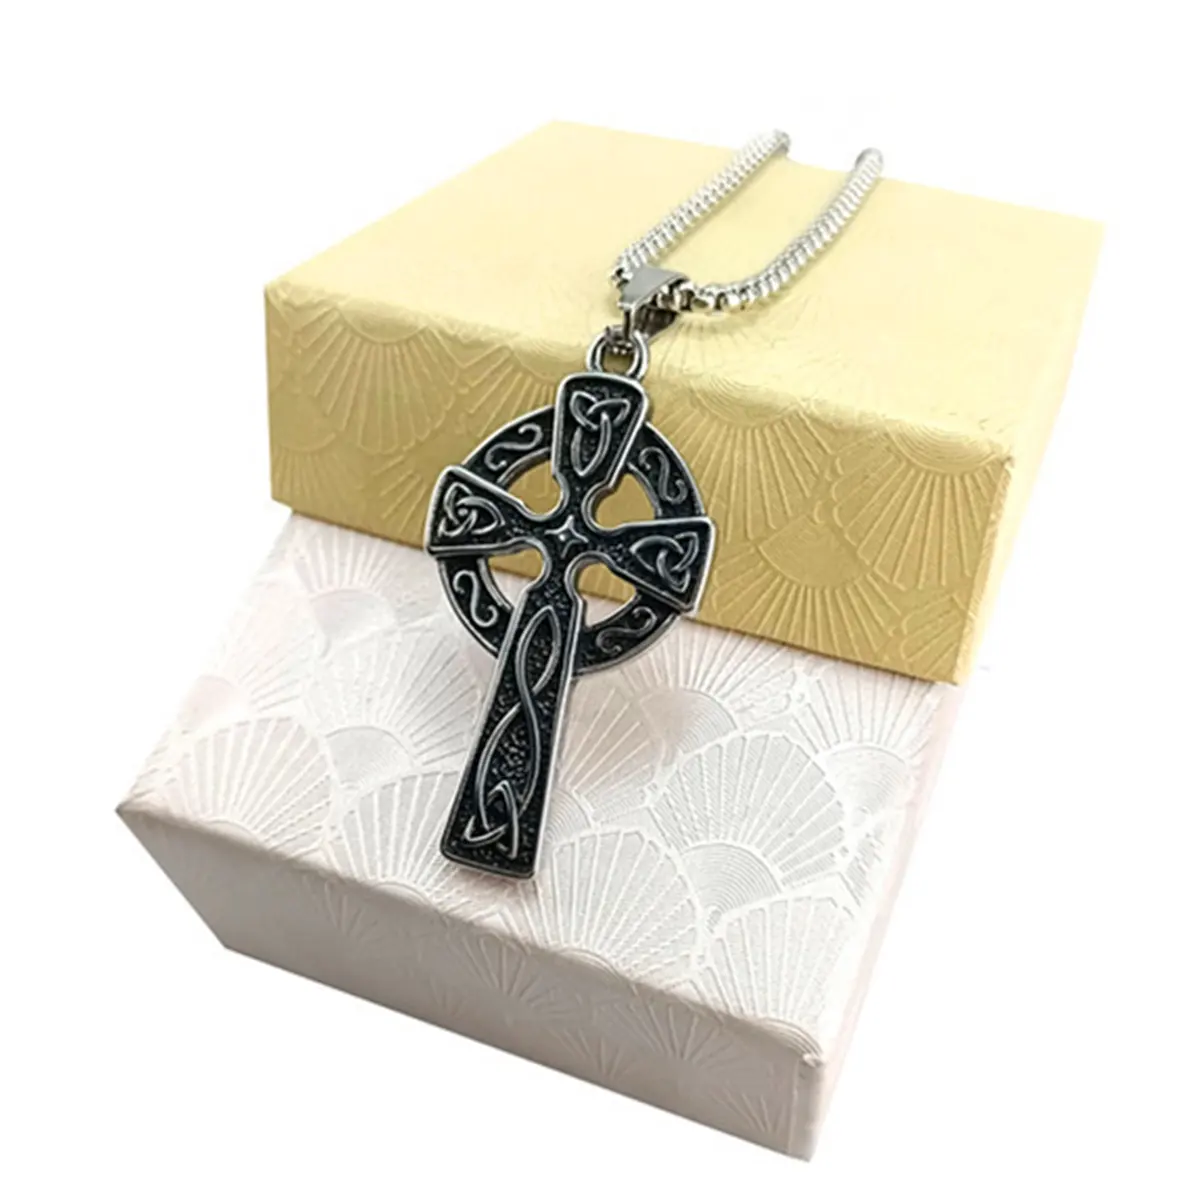 Celtic cross necklace men's personality stainless steel pendant retro overbearing pendant Jewelry